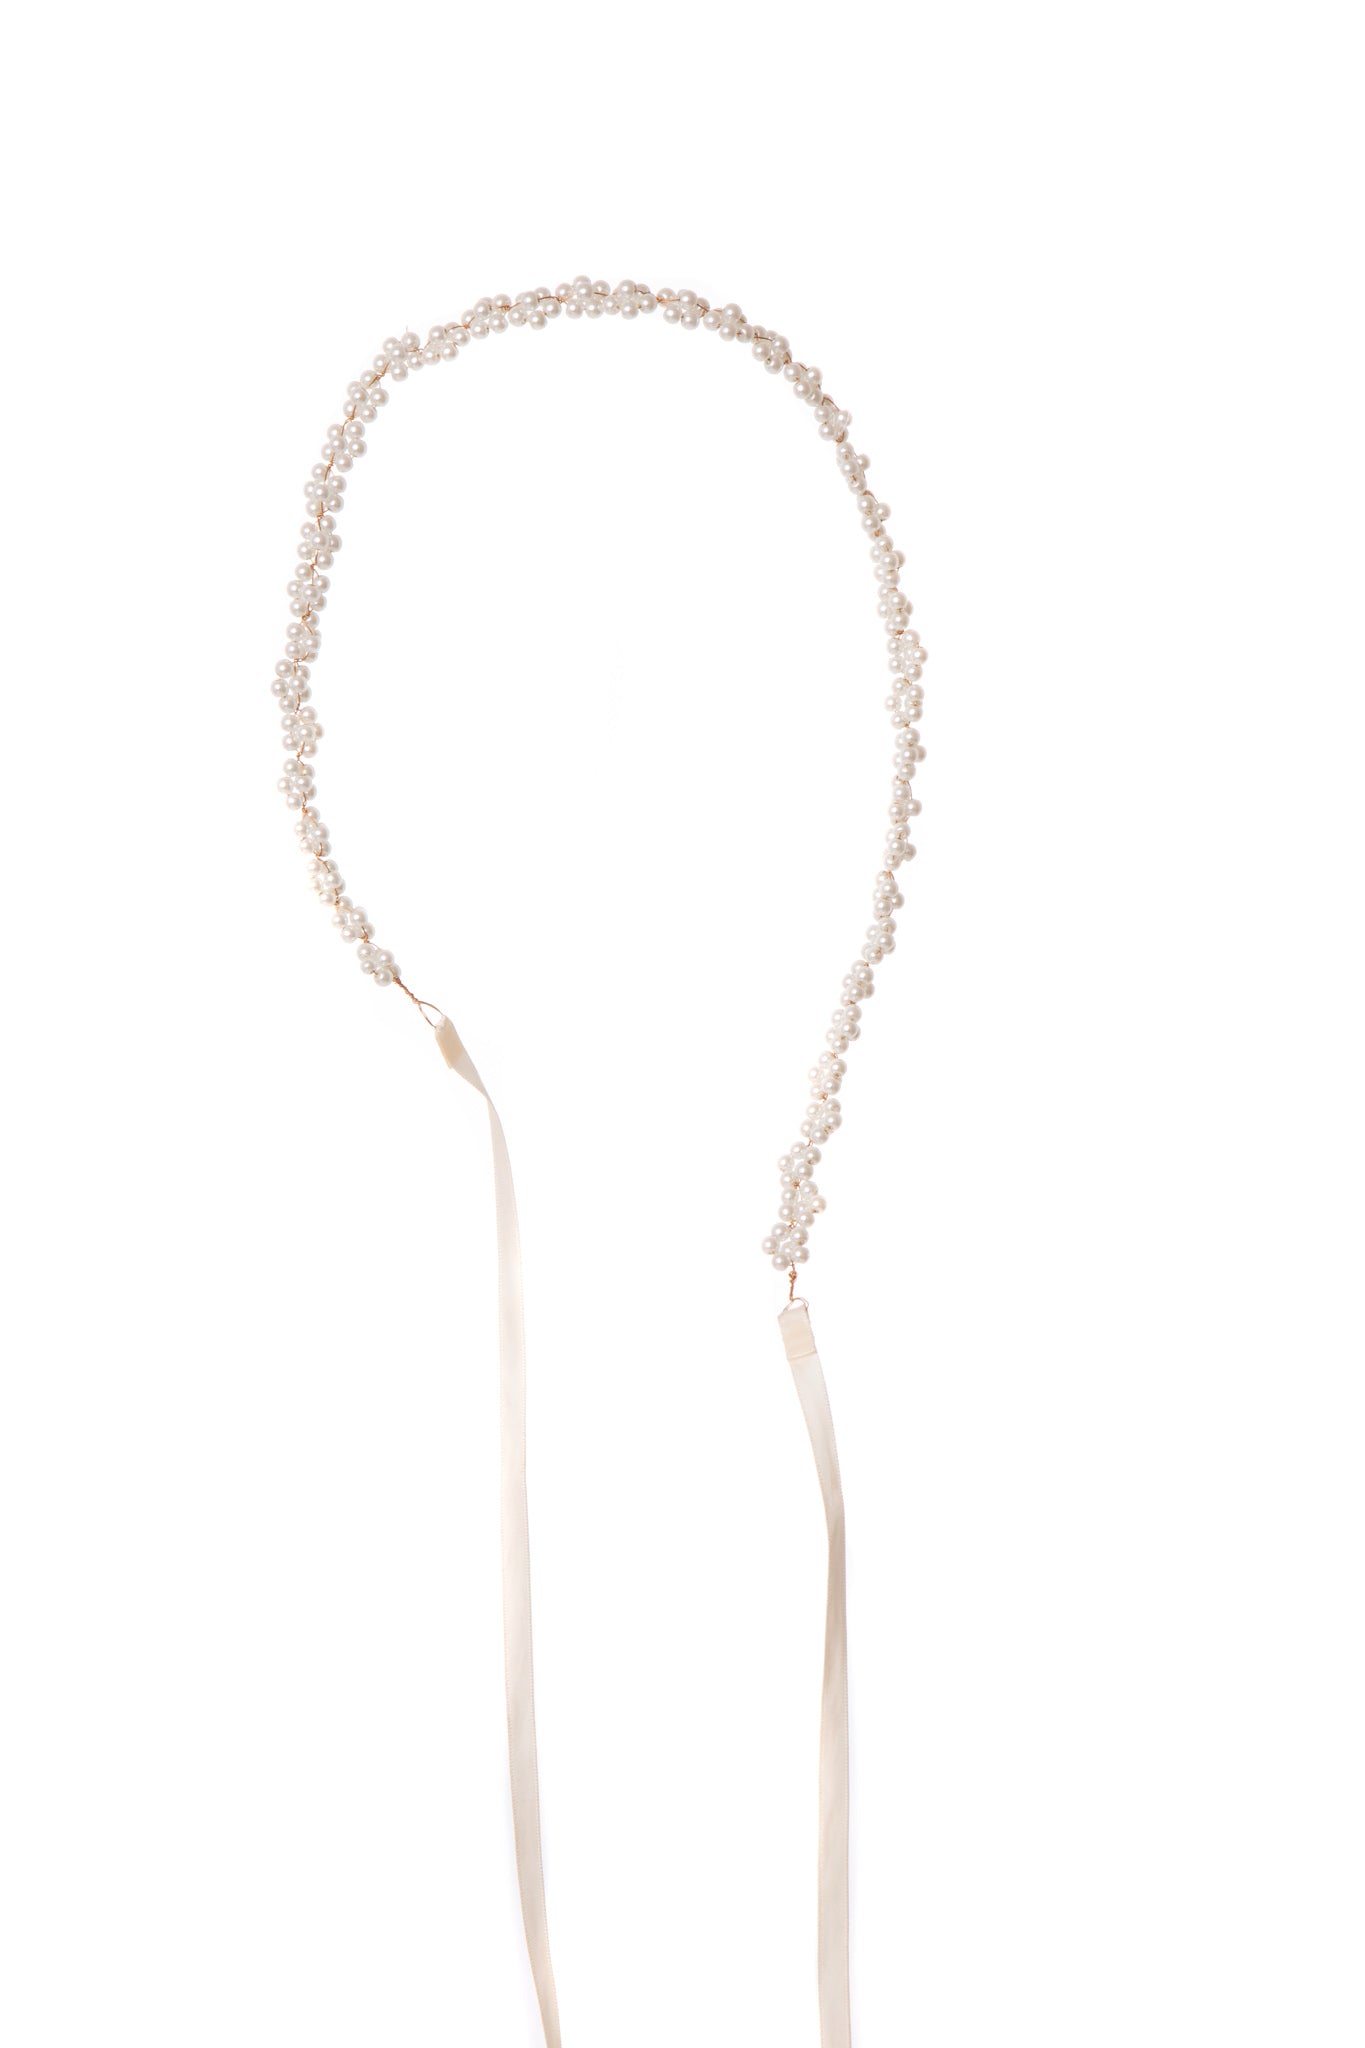 Daisy belt, with its elegant pearls and delicate satin, is a perfect addition to any modern wedding dress. Available in gold or silver wiring, it can easily be tied into a bow for a chic and sophisticated look.